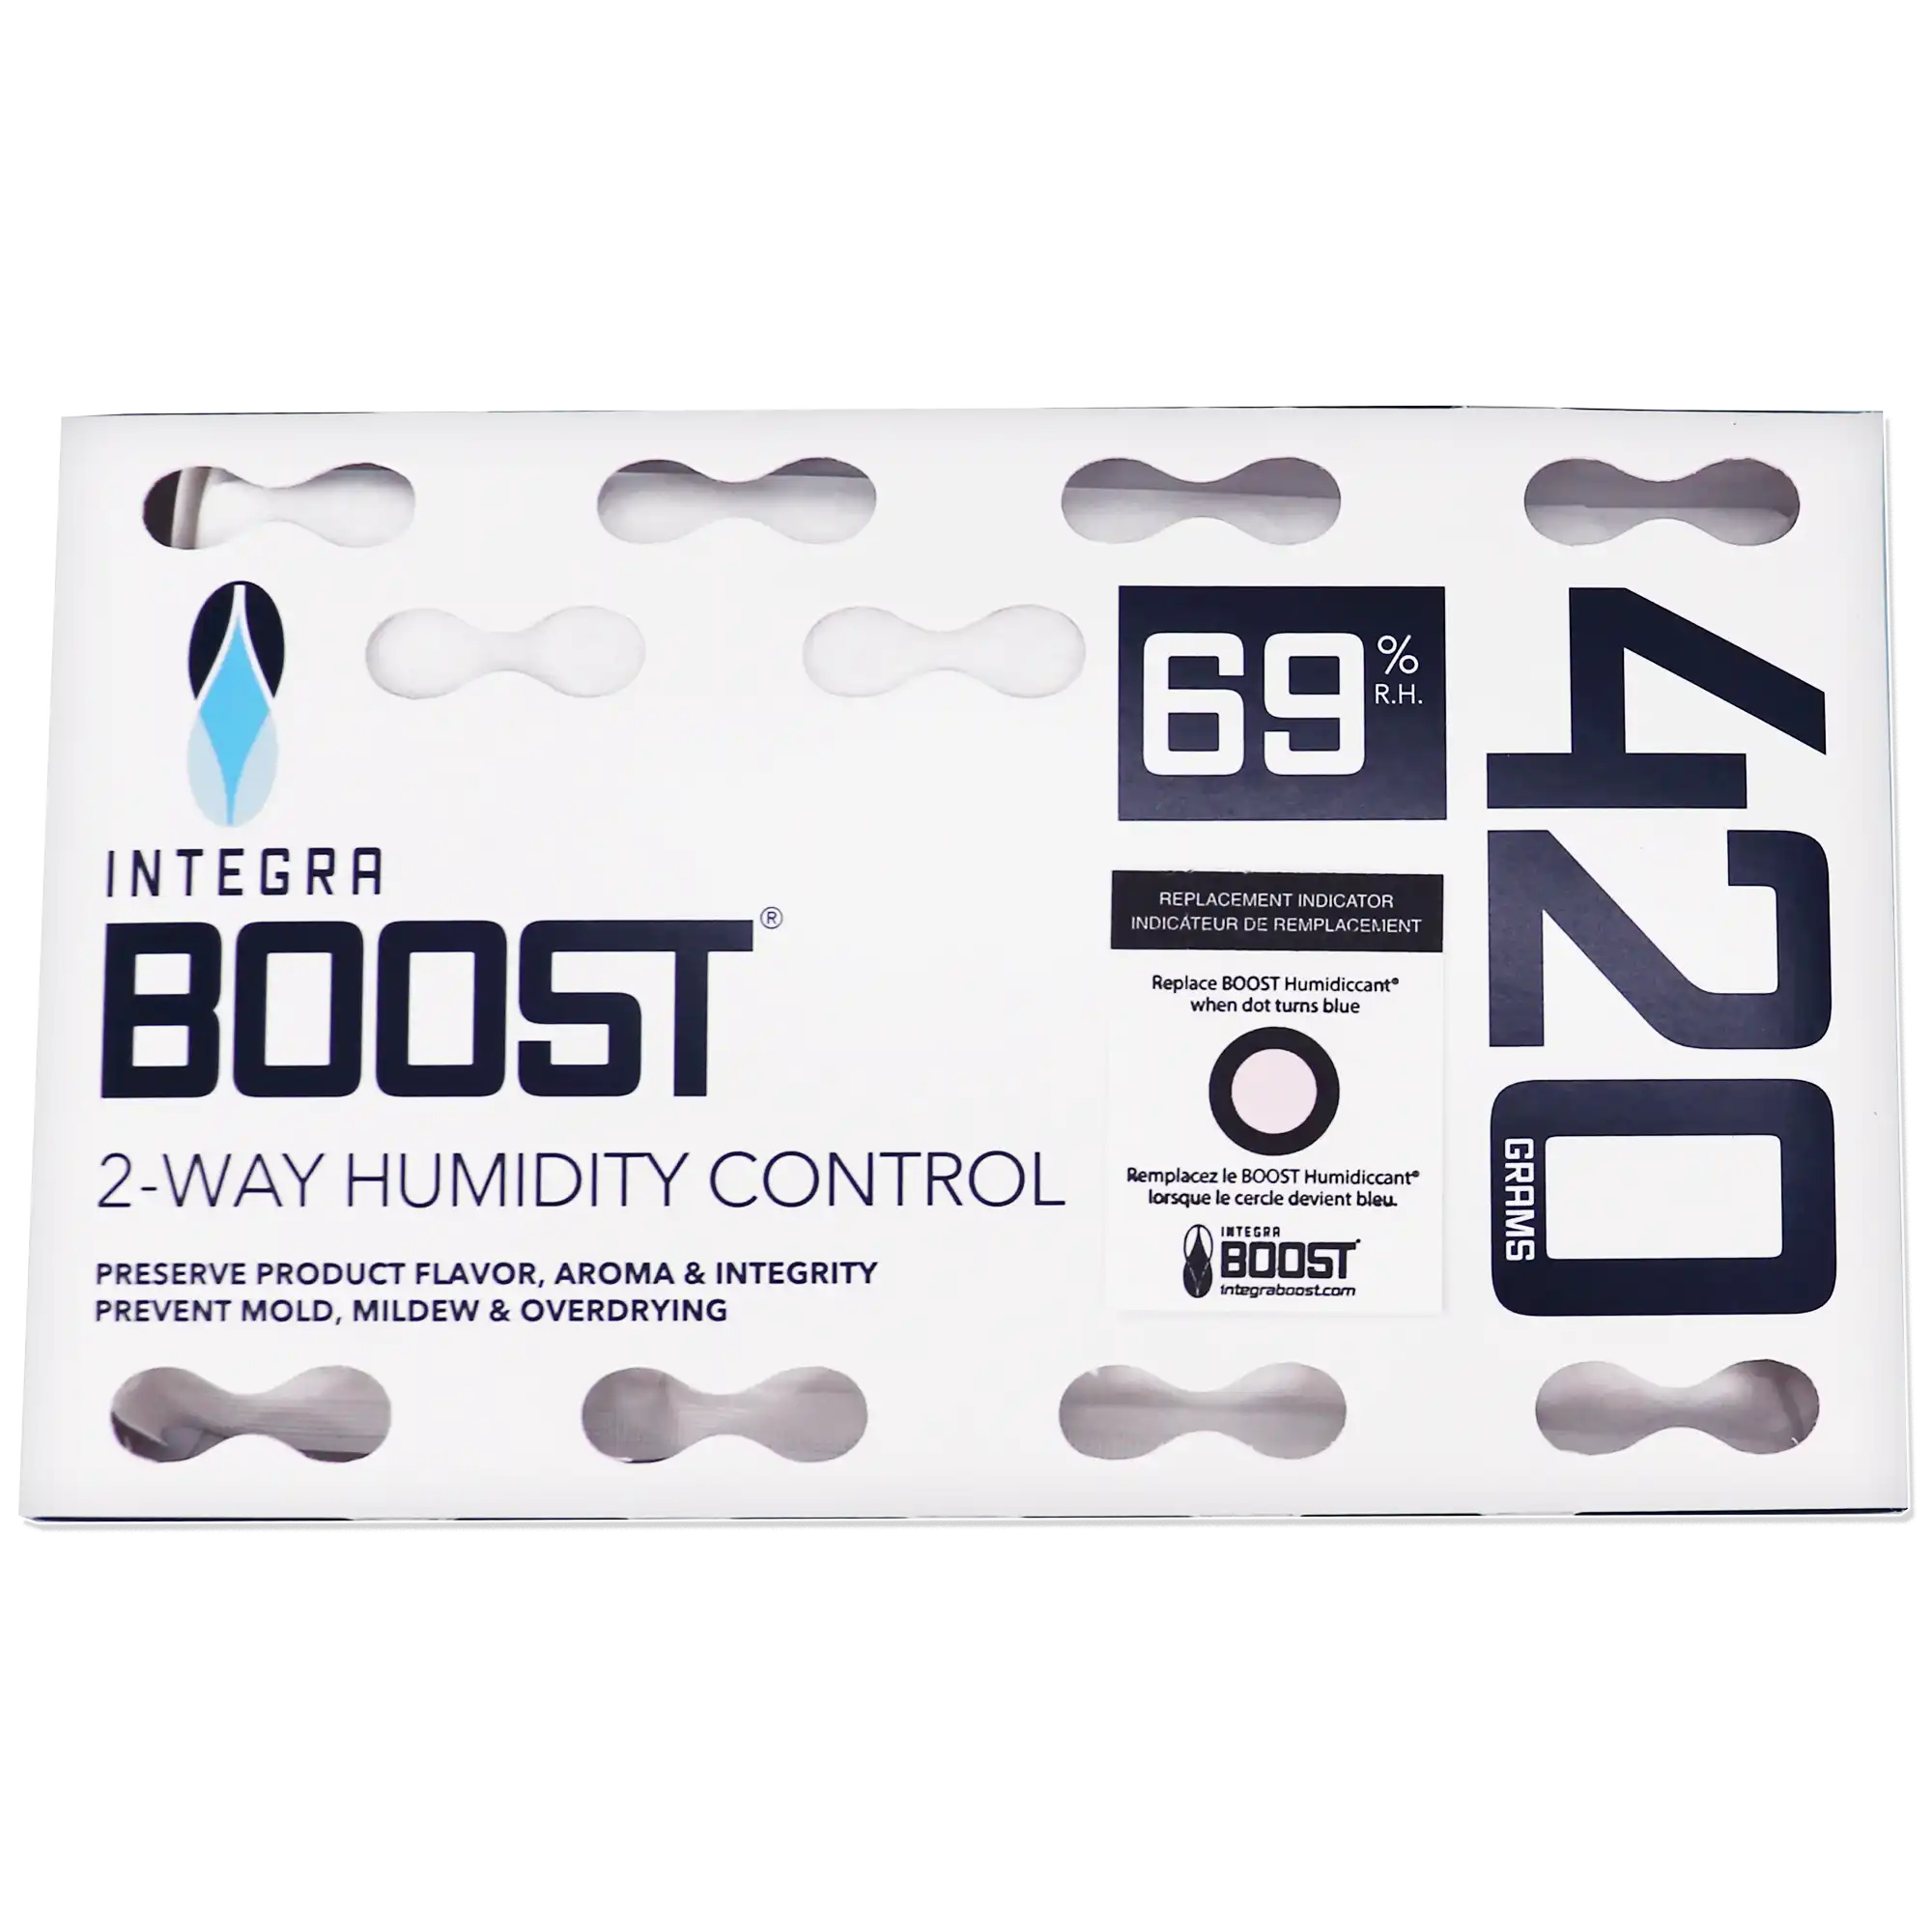 Integra Boost 420g Befeuchterpack 69% R.H.
